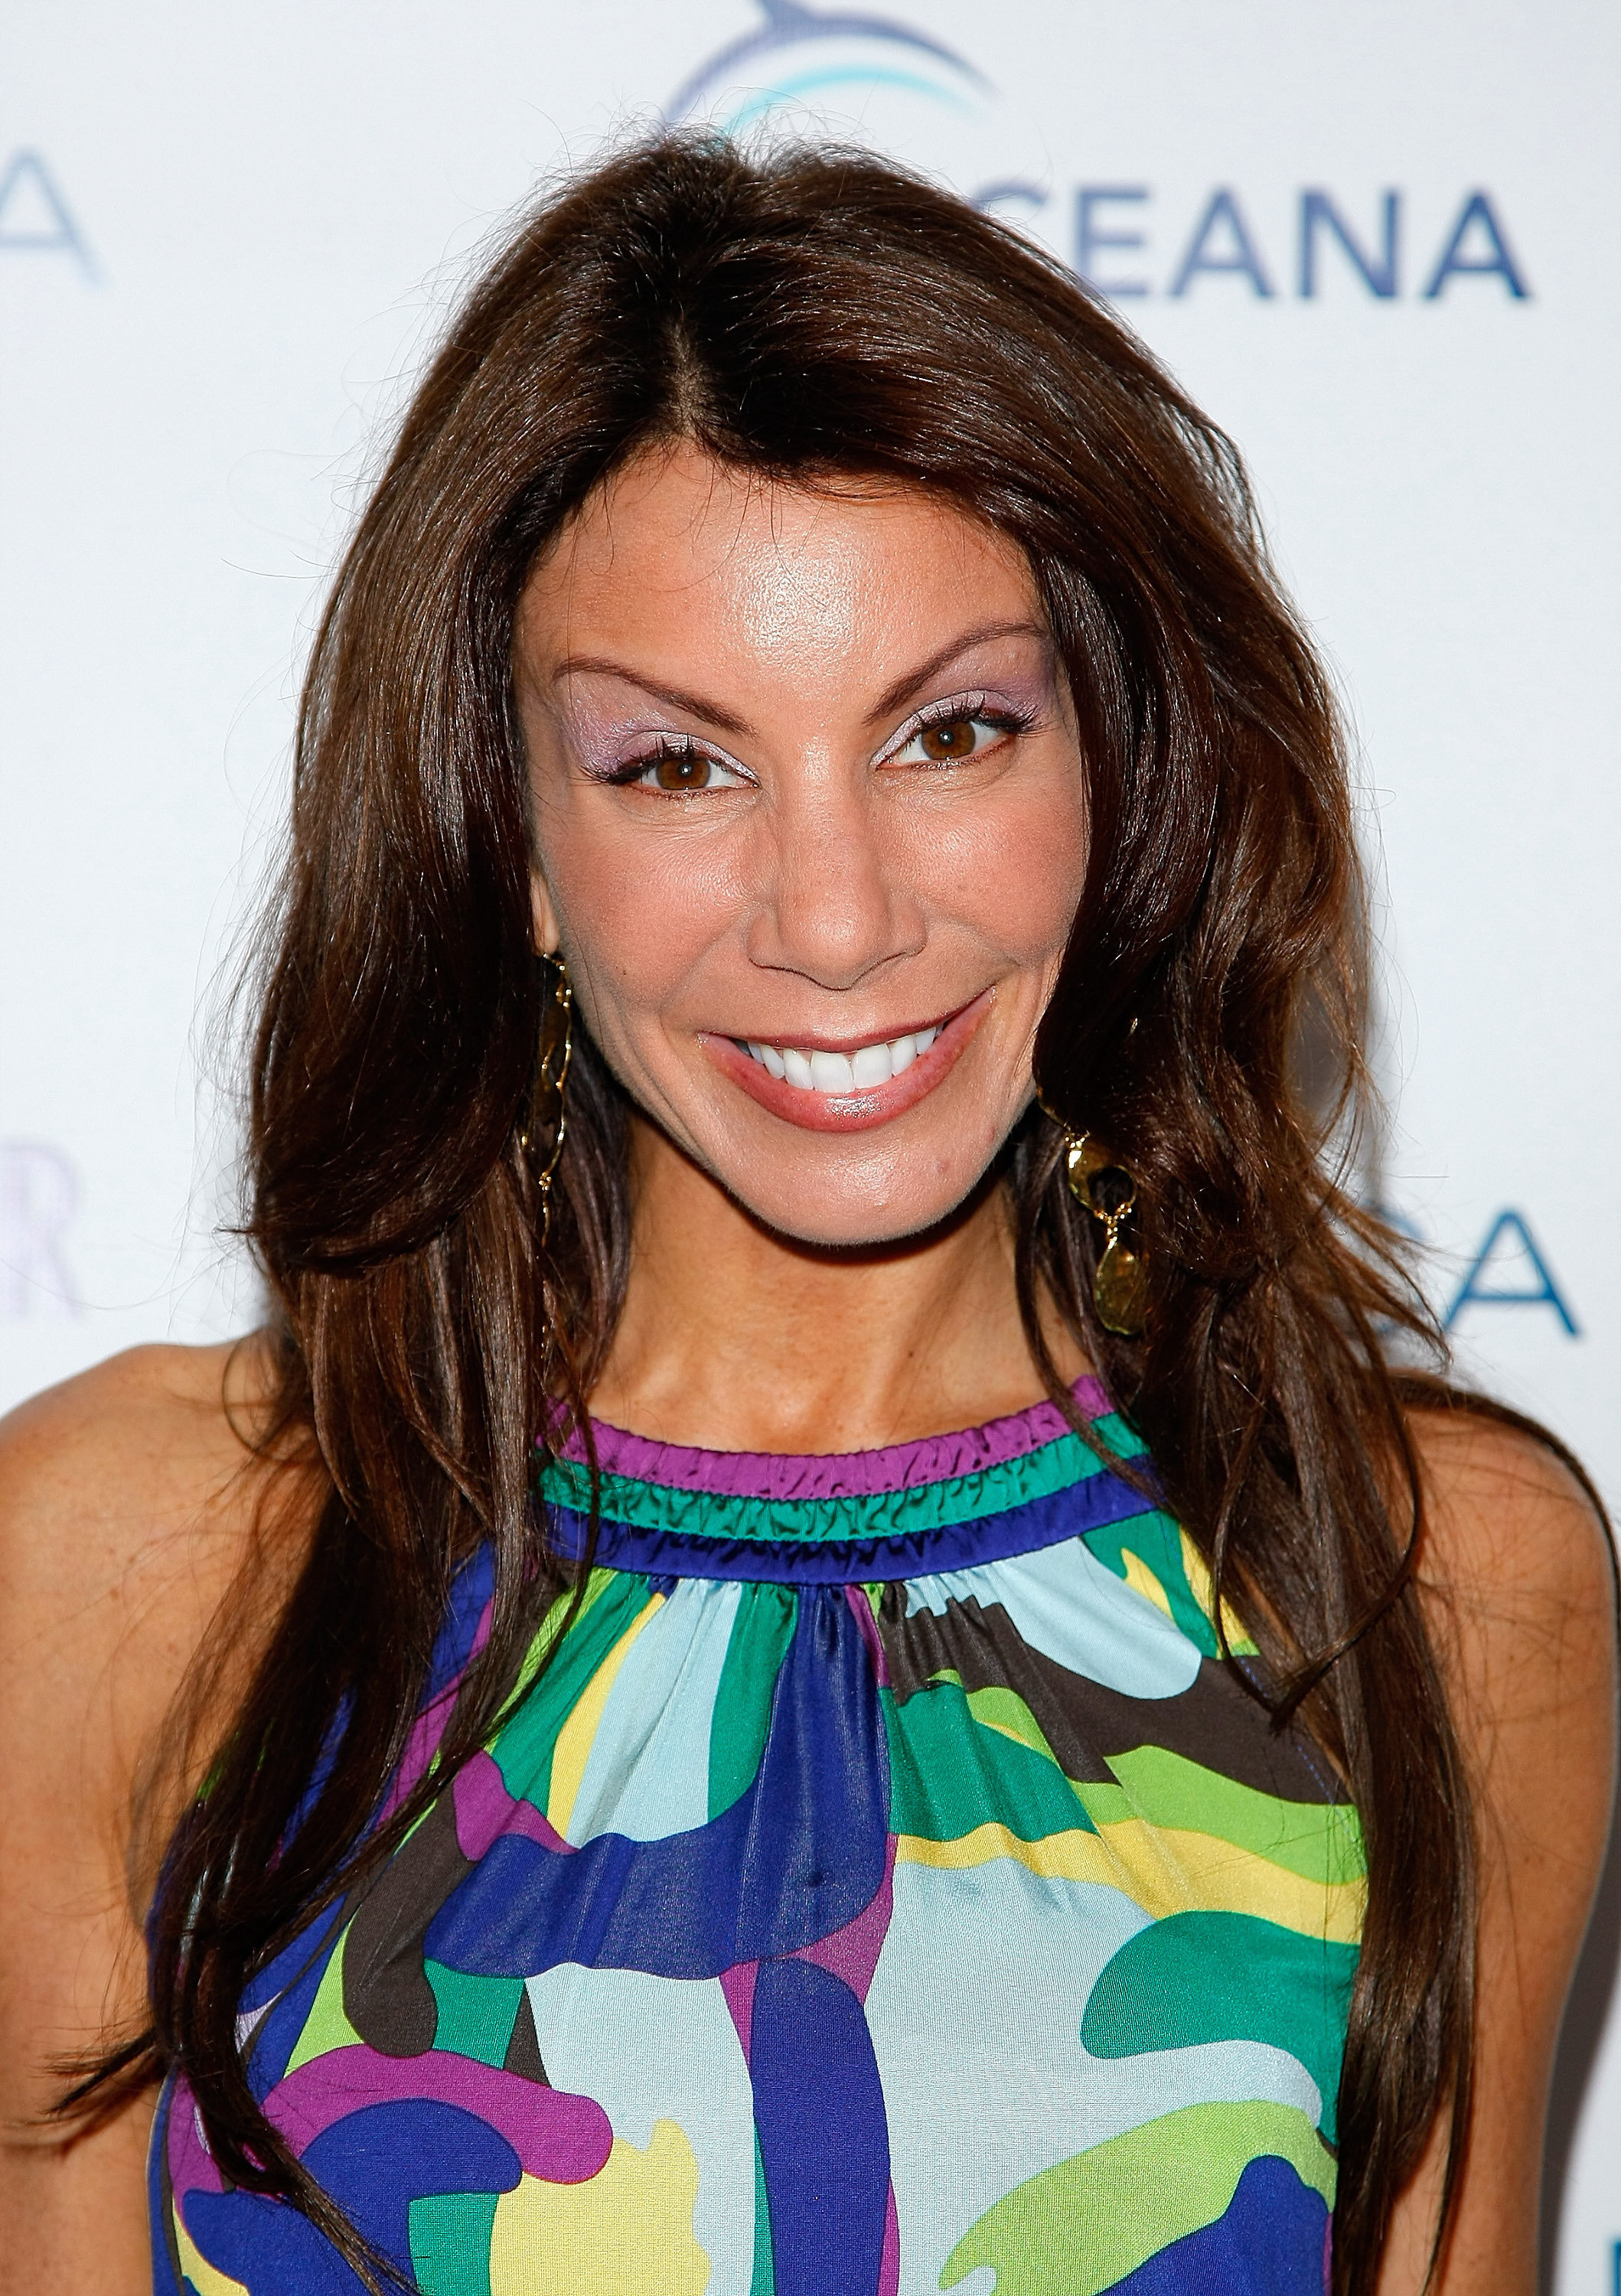 Danielle Staub FIRED From Real Housewives Of New Jersey HuffPost Entertainment pic